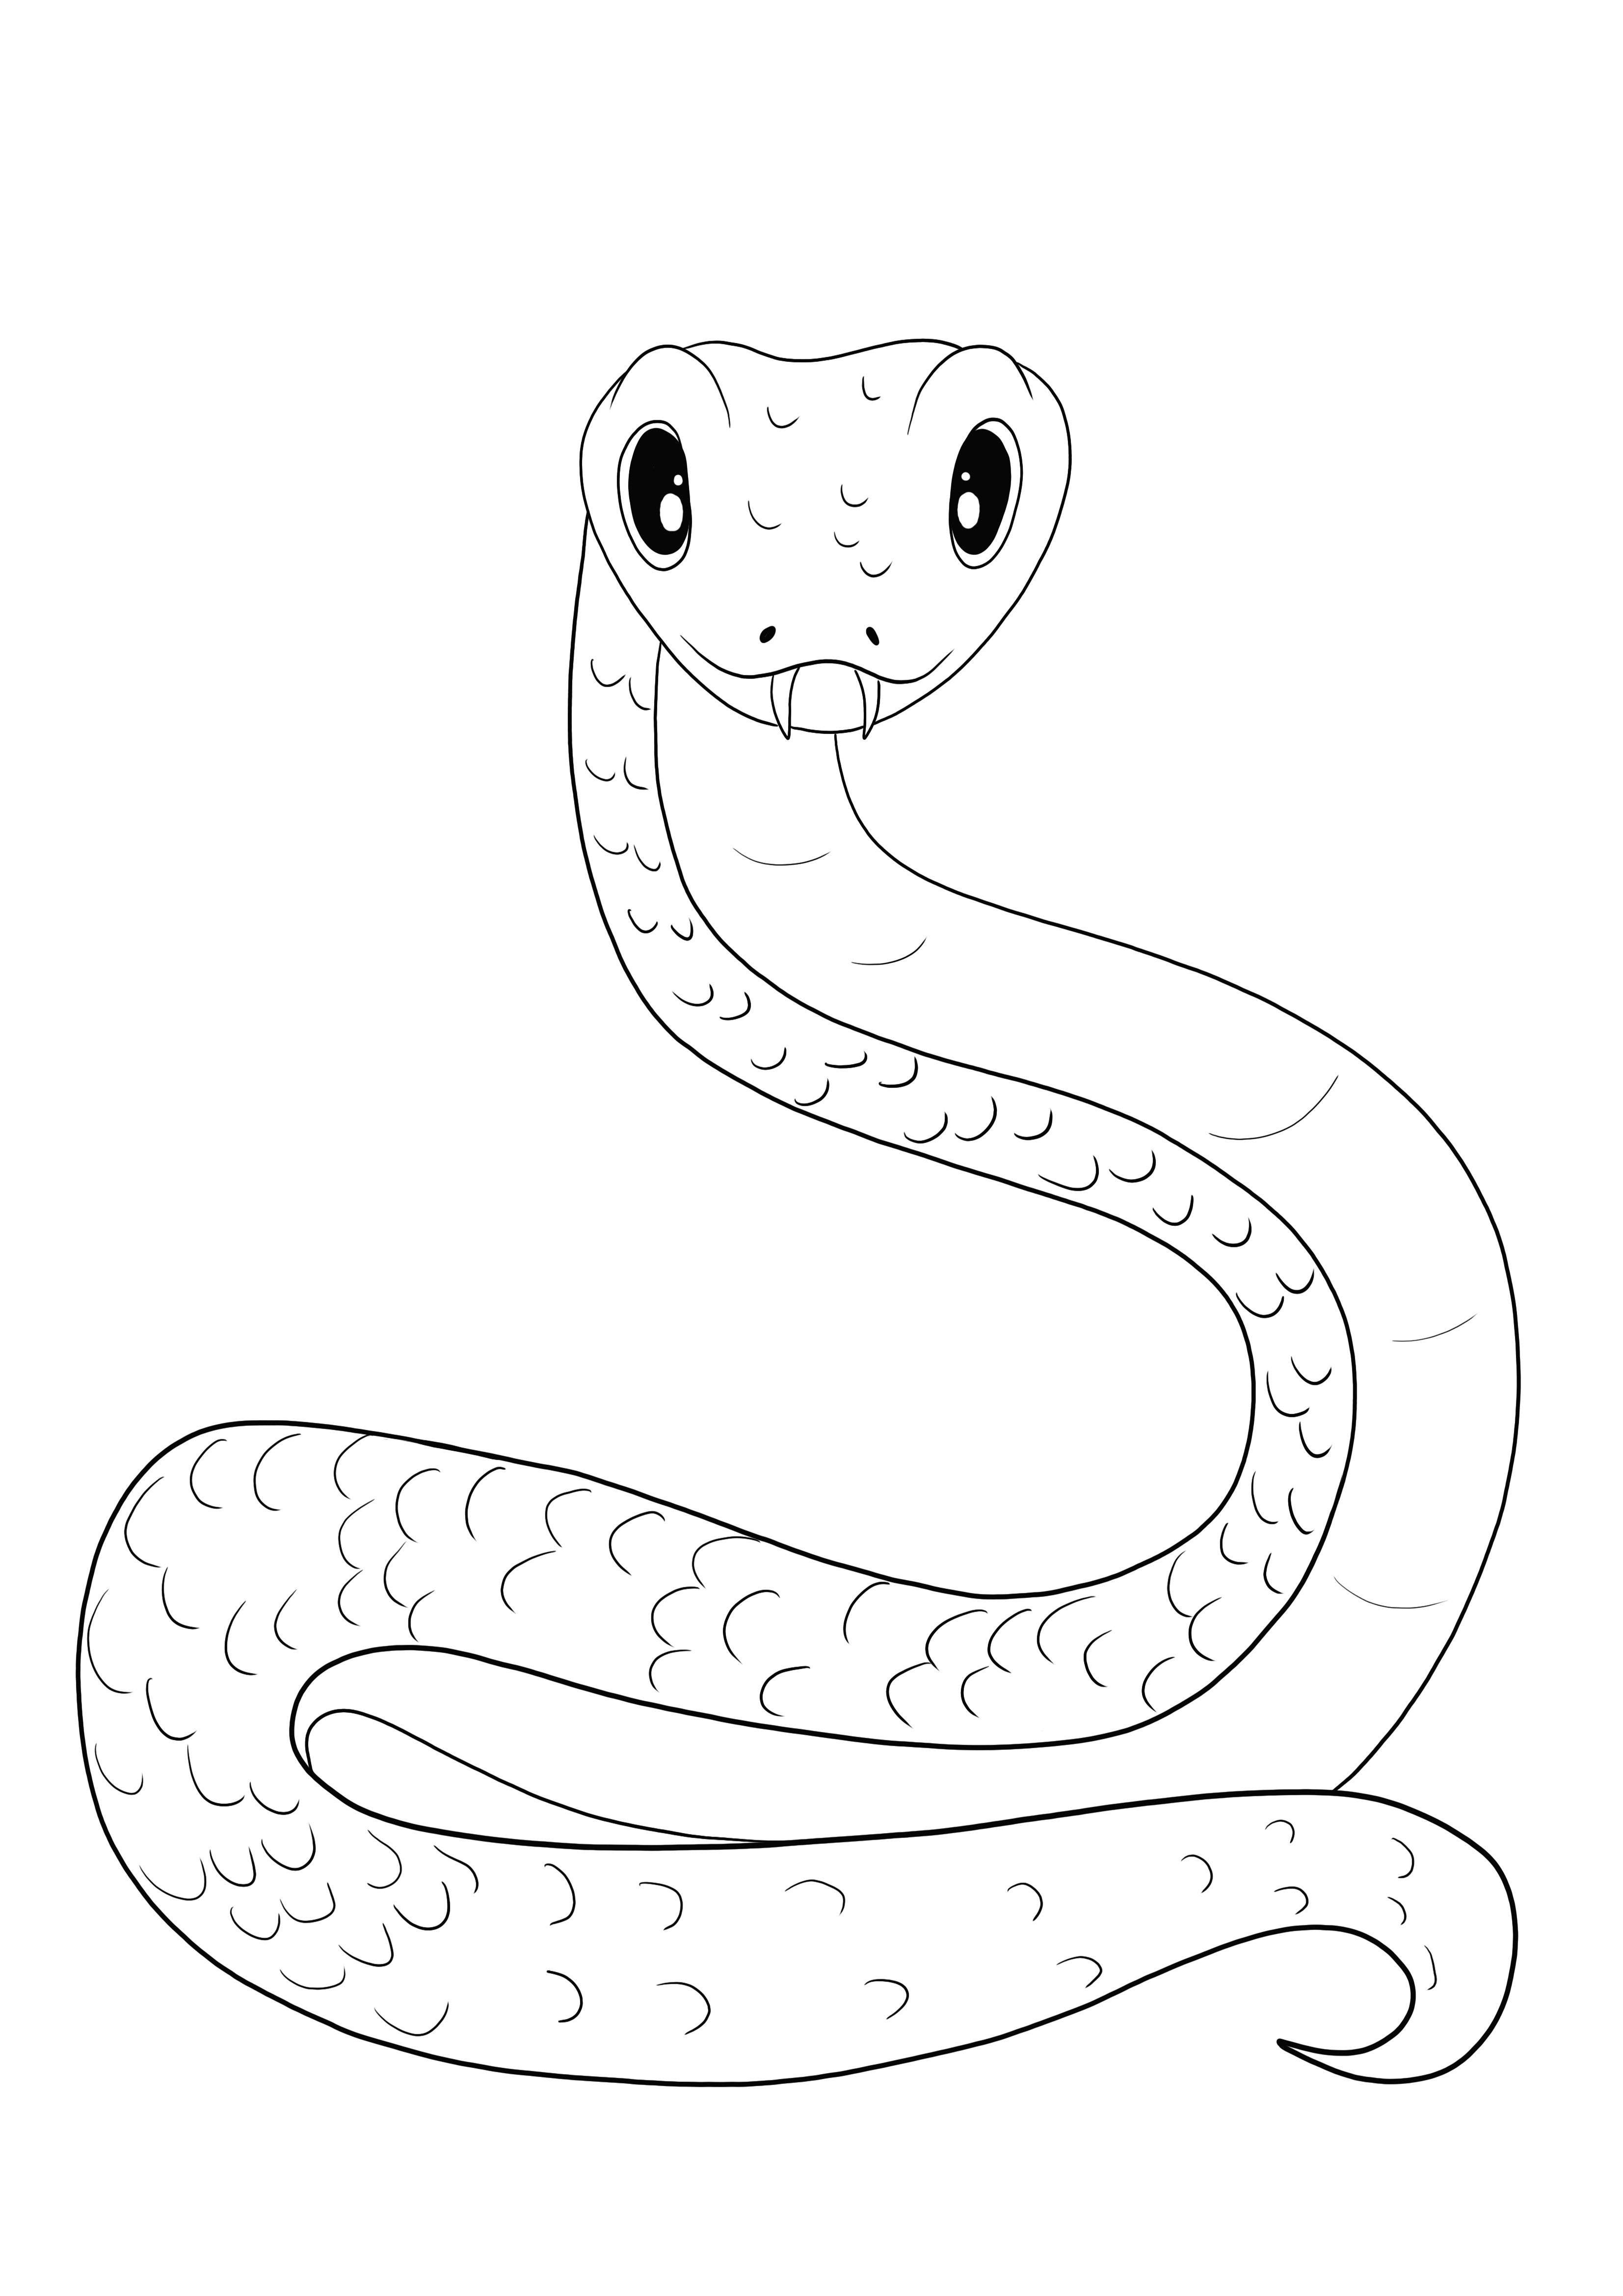 A big Viper standing free printable is ready for coloring by kids of all ages